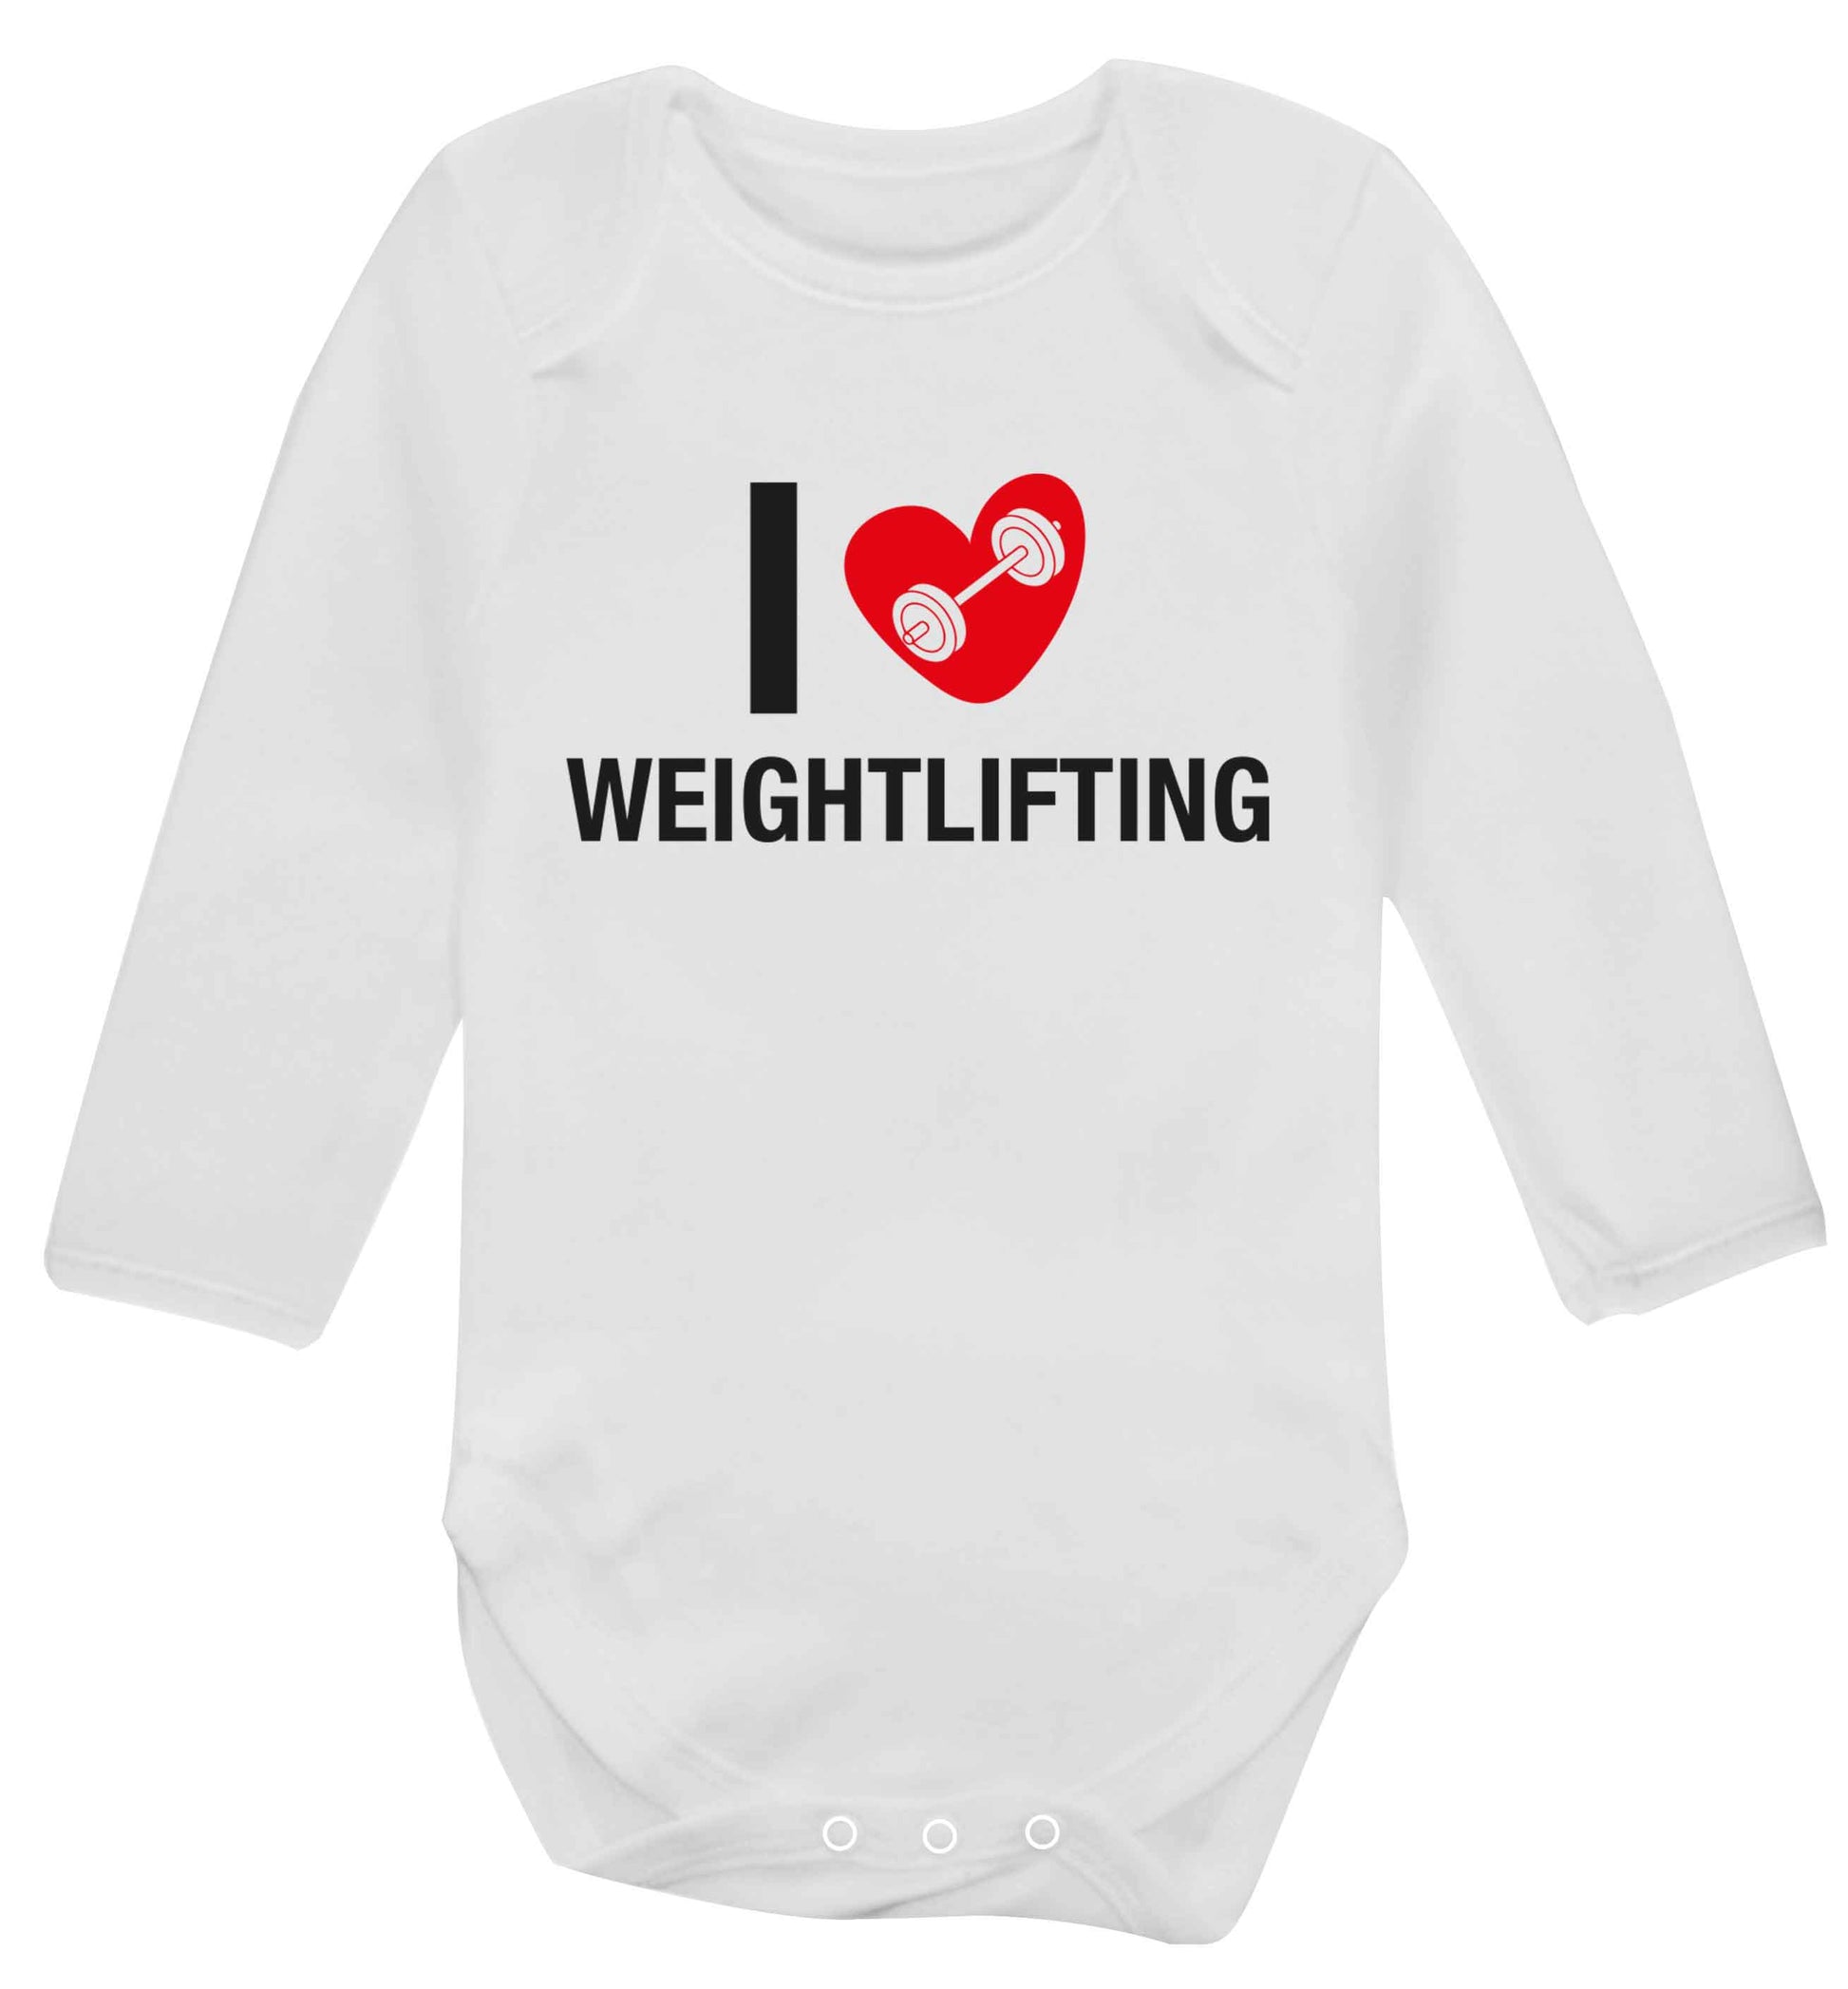 I love weightlifting Baby Vest long sleeved white 6-12 months